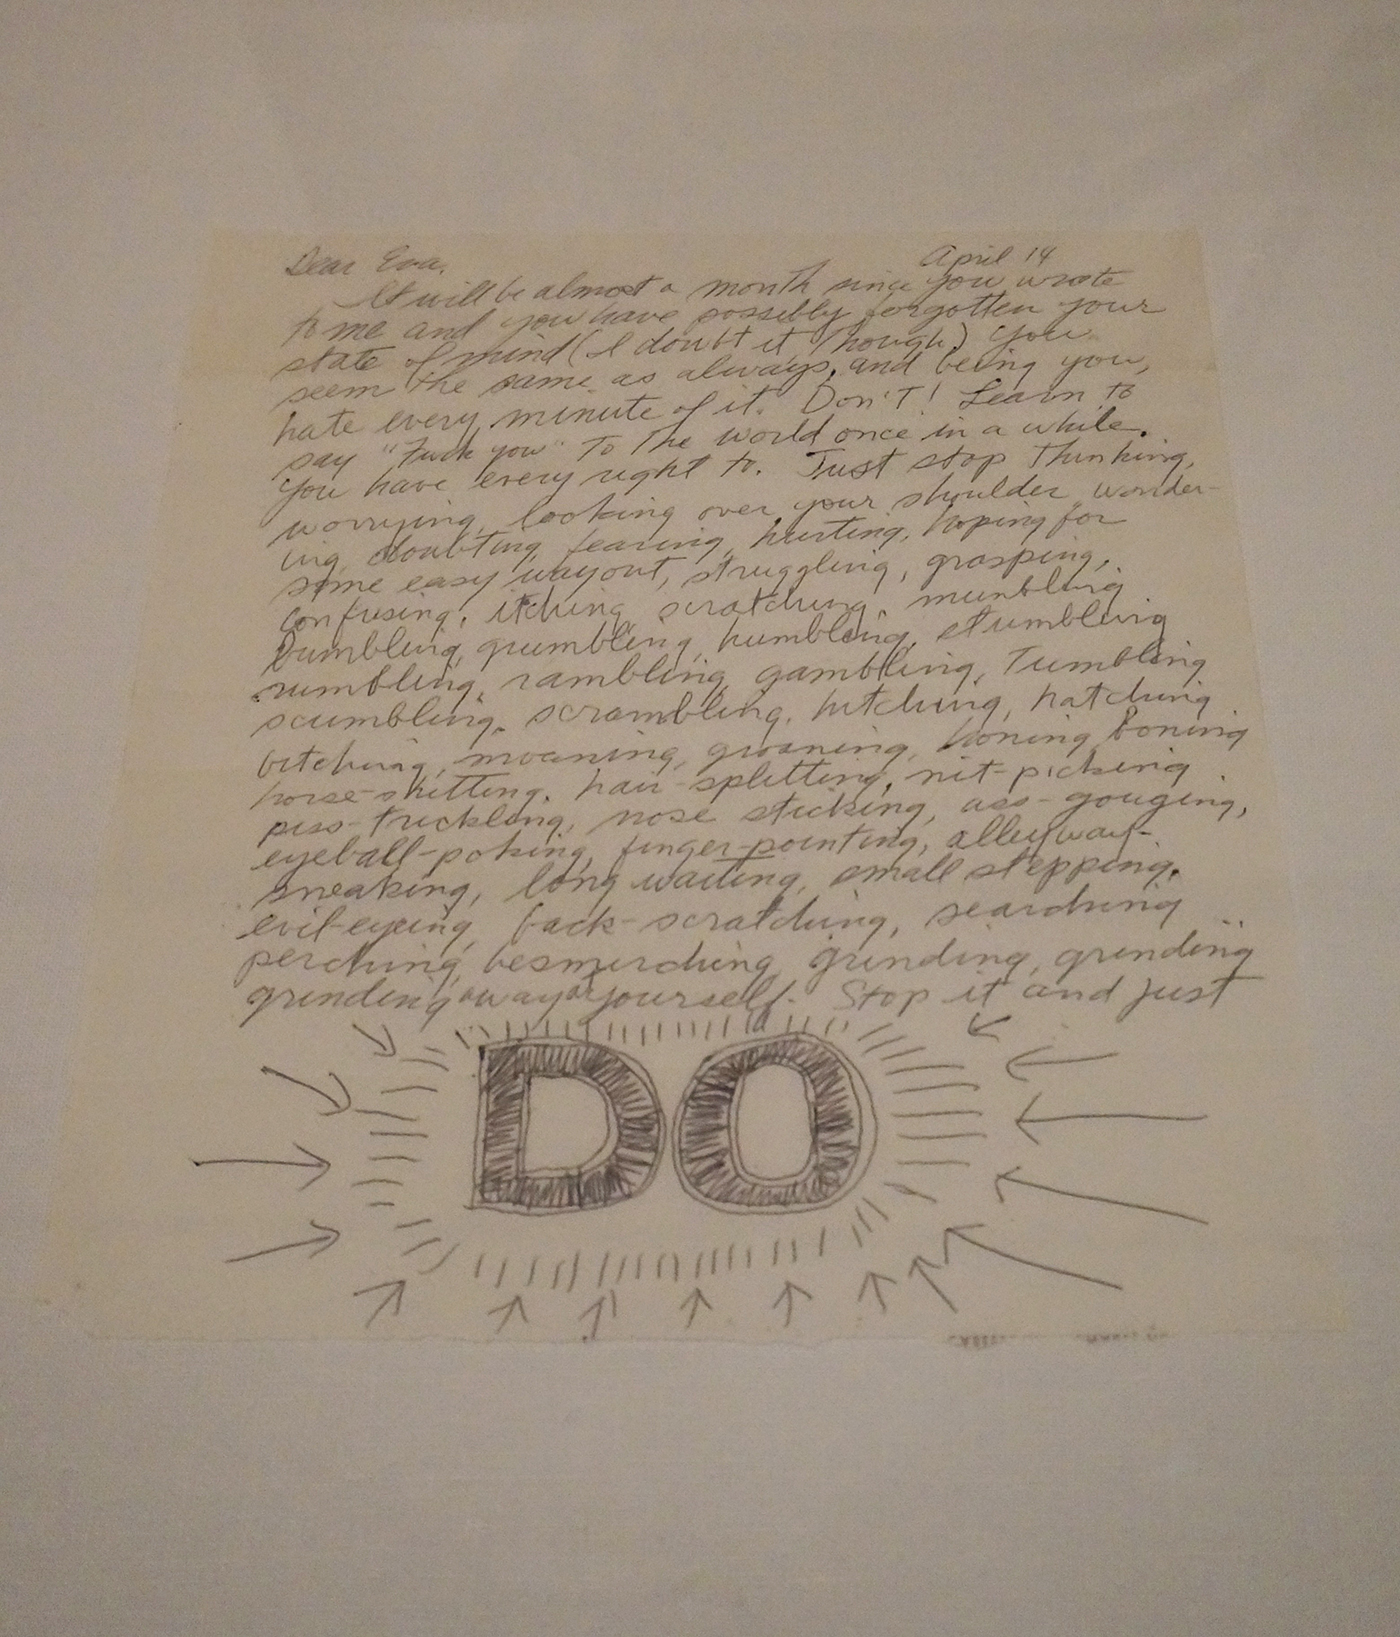 A page from Sol LeWitt's 1965 letter to Eva Hesse (click to enlarge)